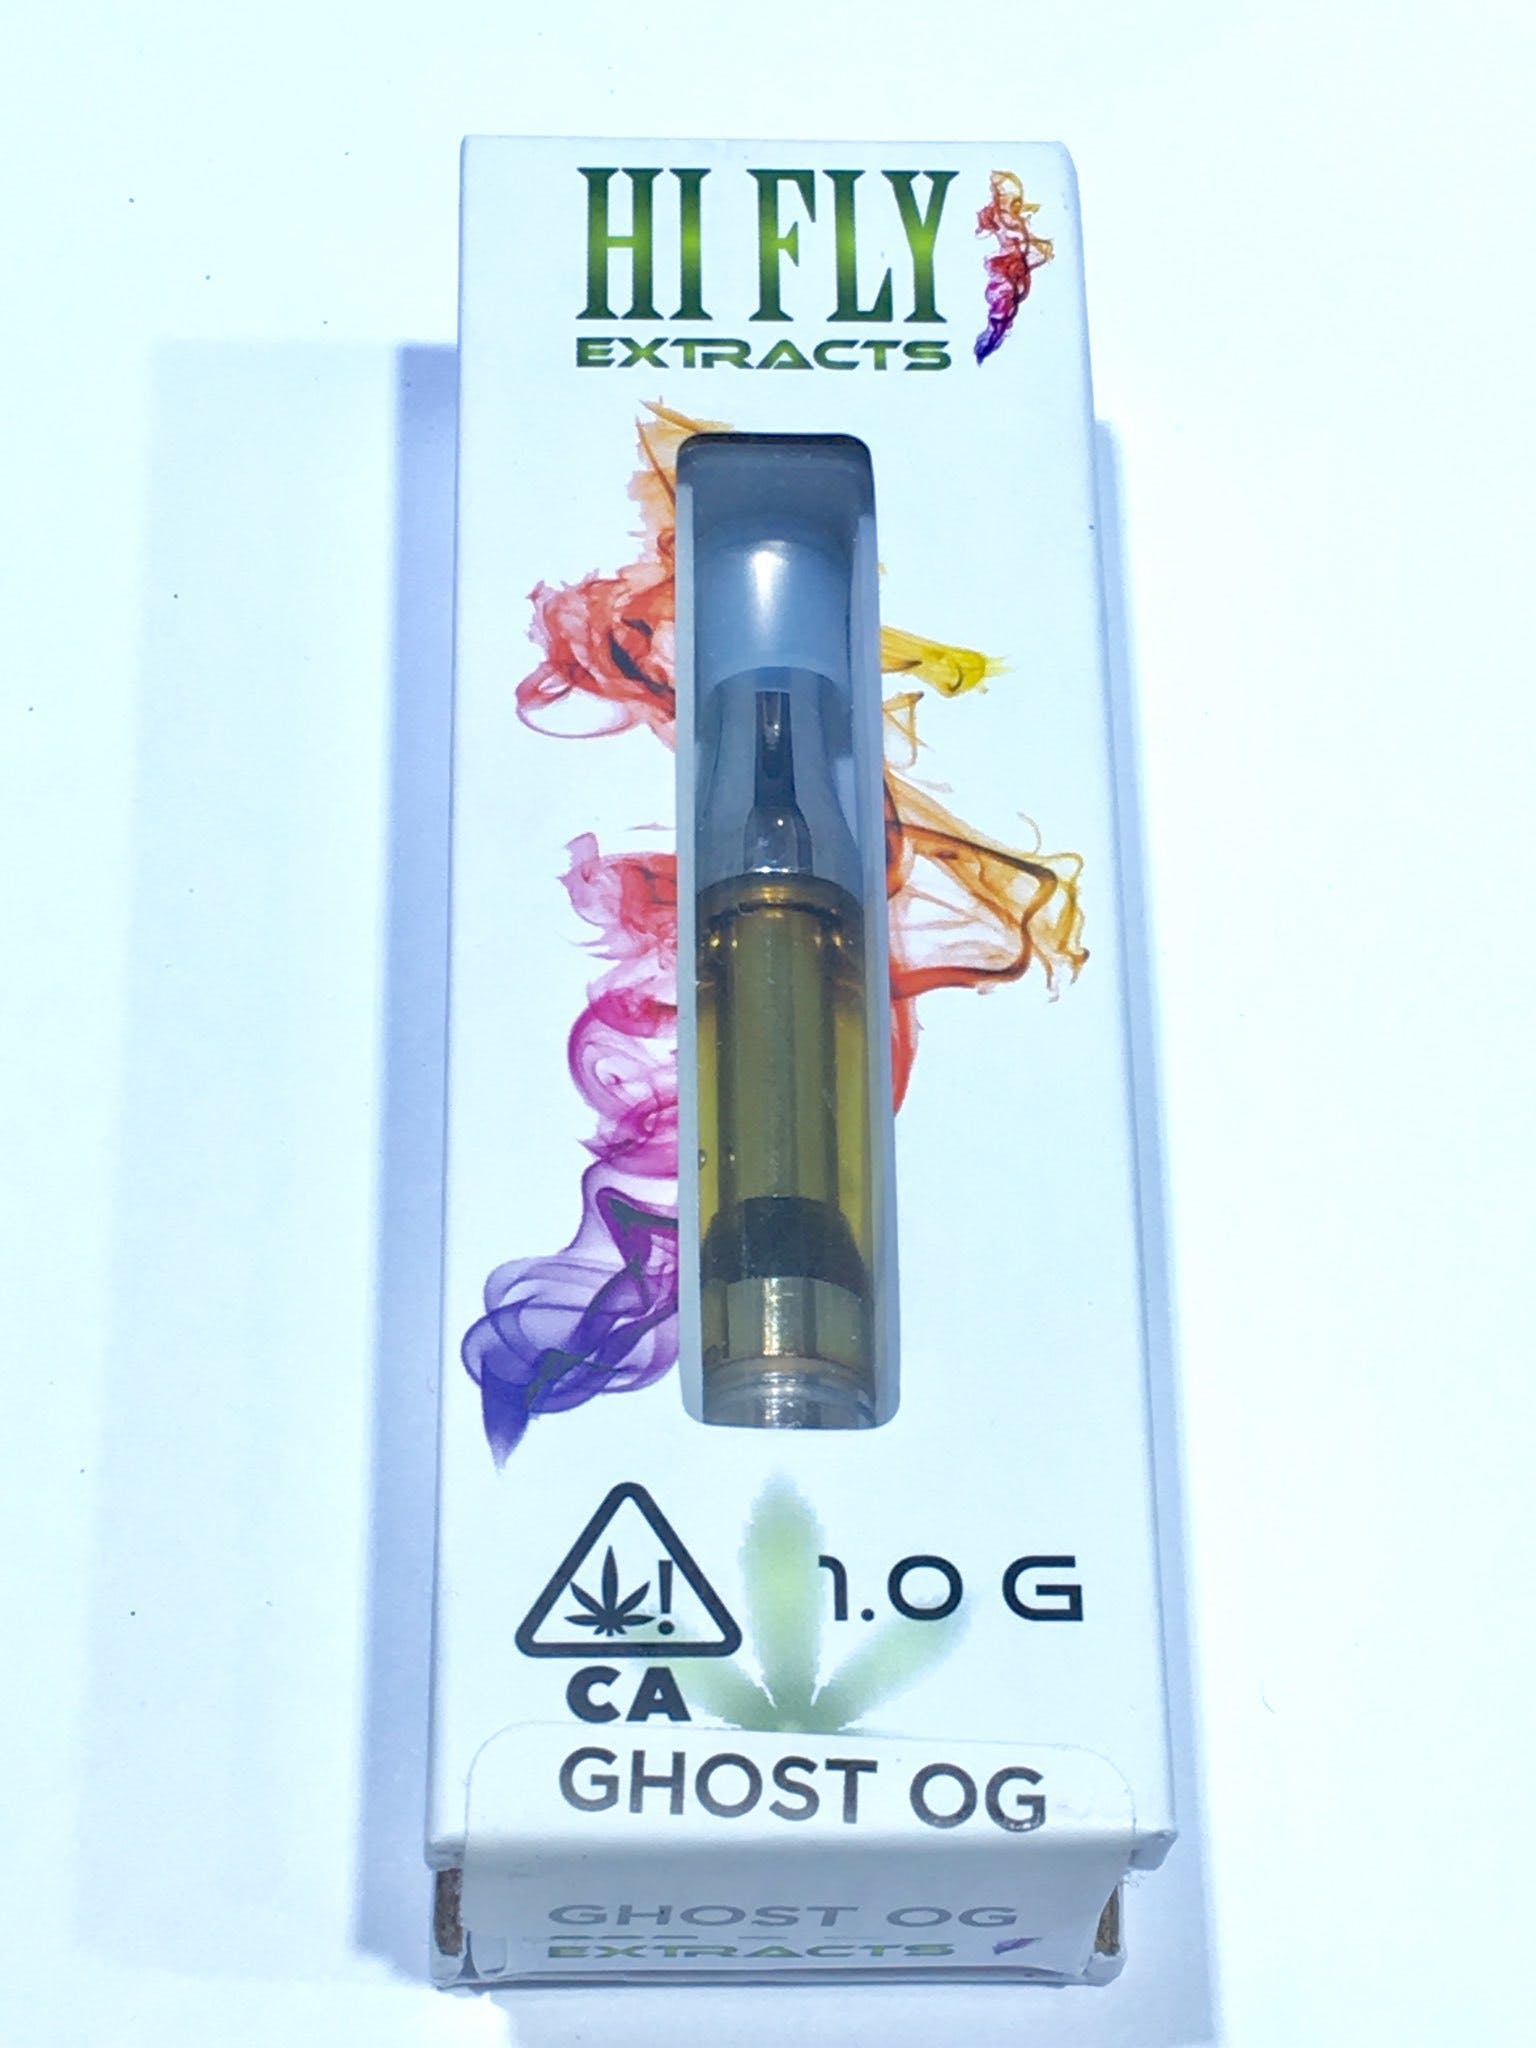 concentrate-hifly-1g-vapes-2g-for-2465